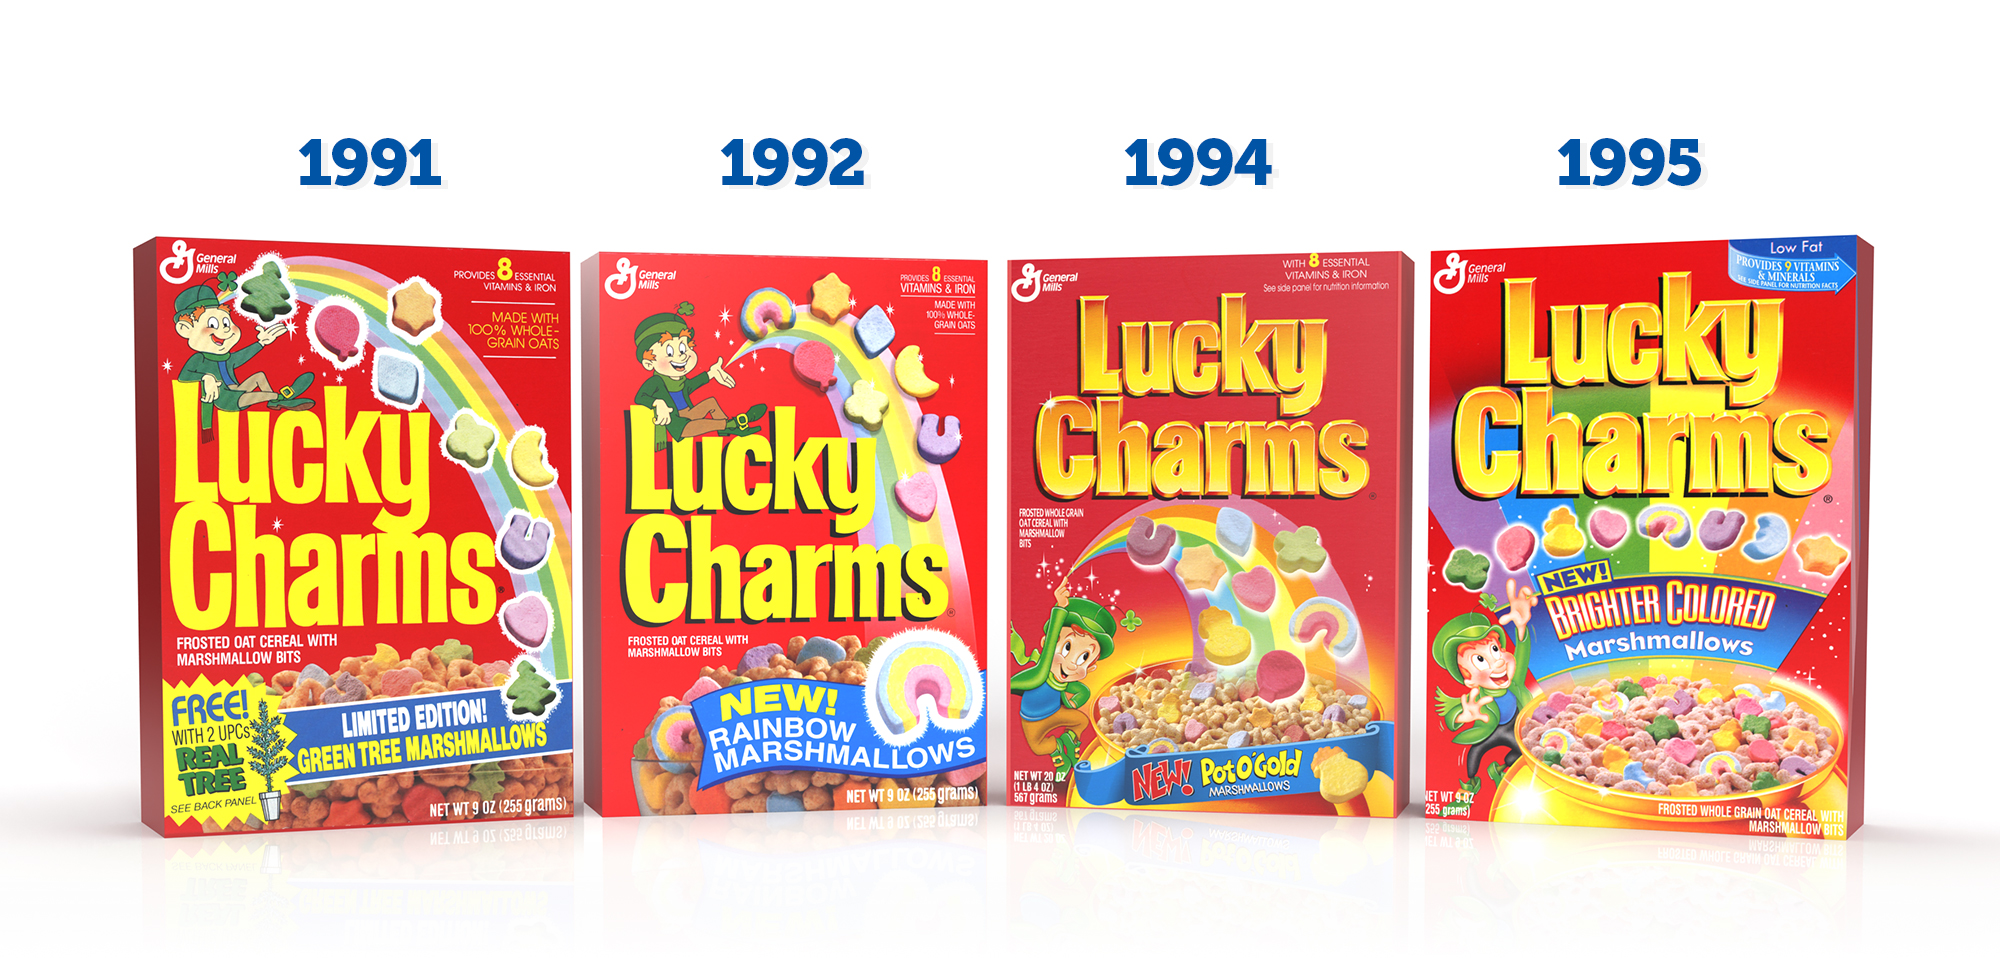 Lucky Charms boxes from 1991 to 1995